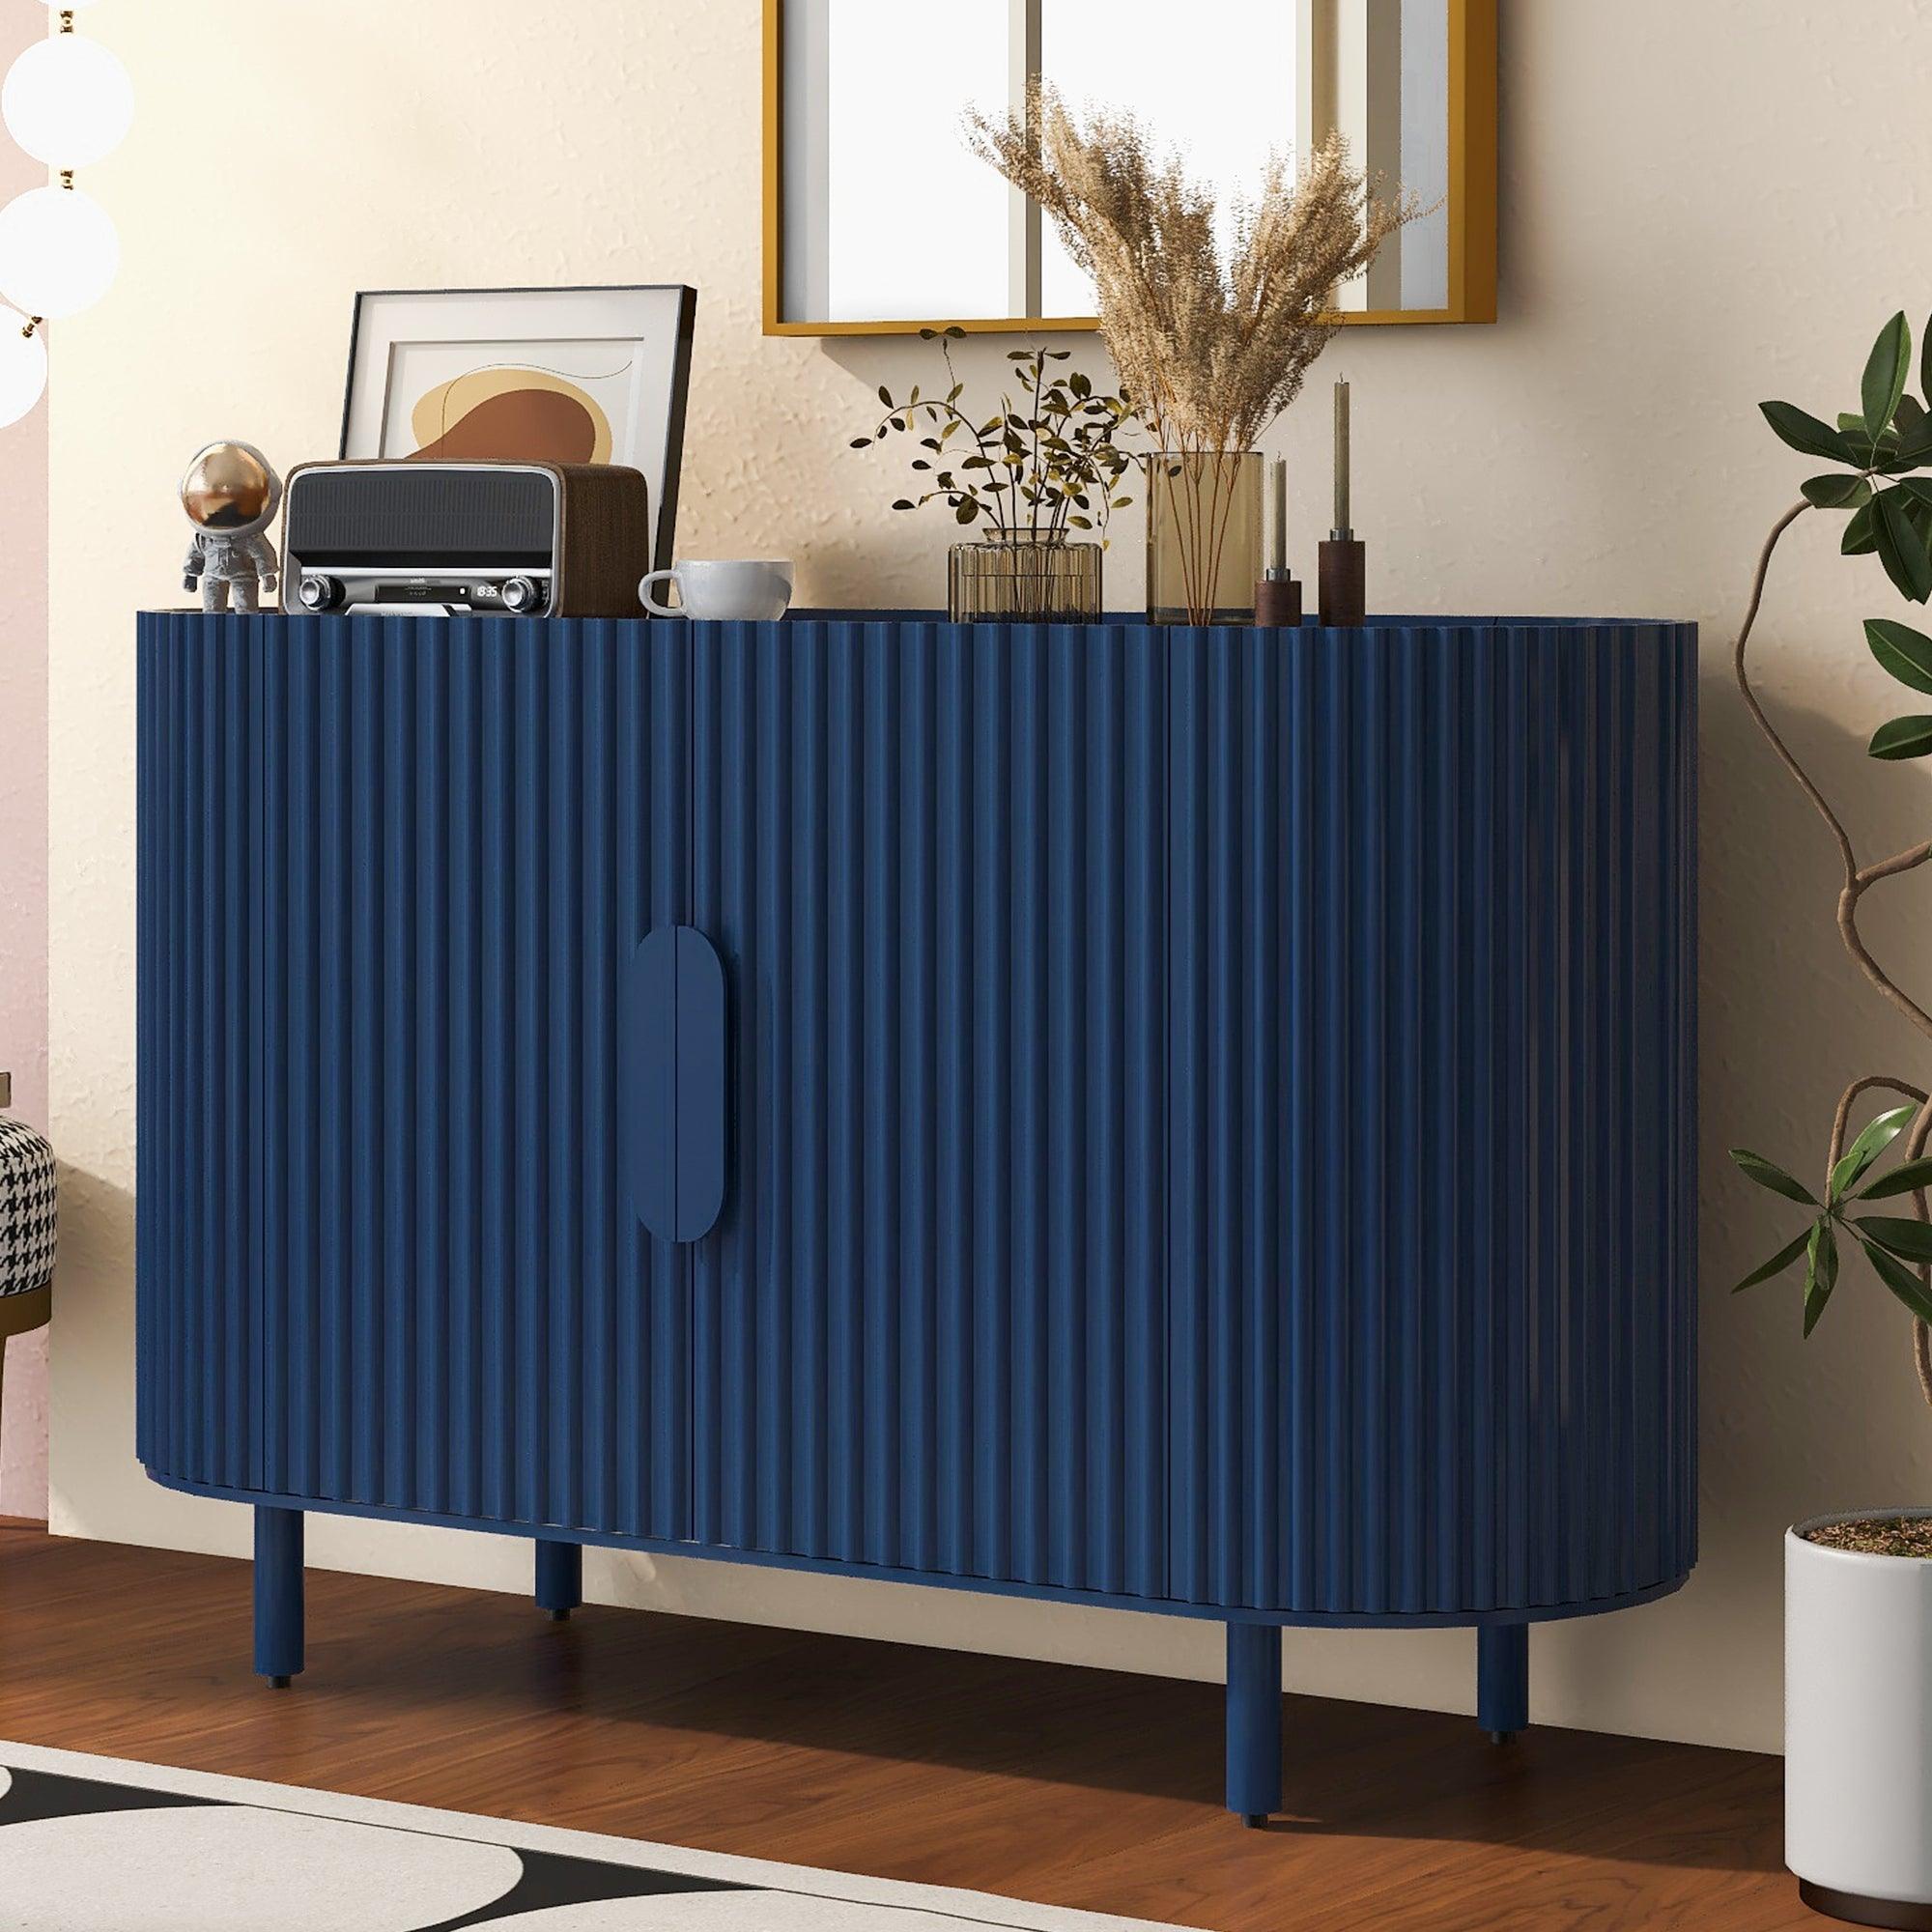 Curved Design Light Luxury Sideboard with Adjustable Shelves, Suitable for Living Room, Study and Entrance LamCham